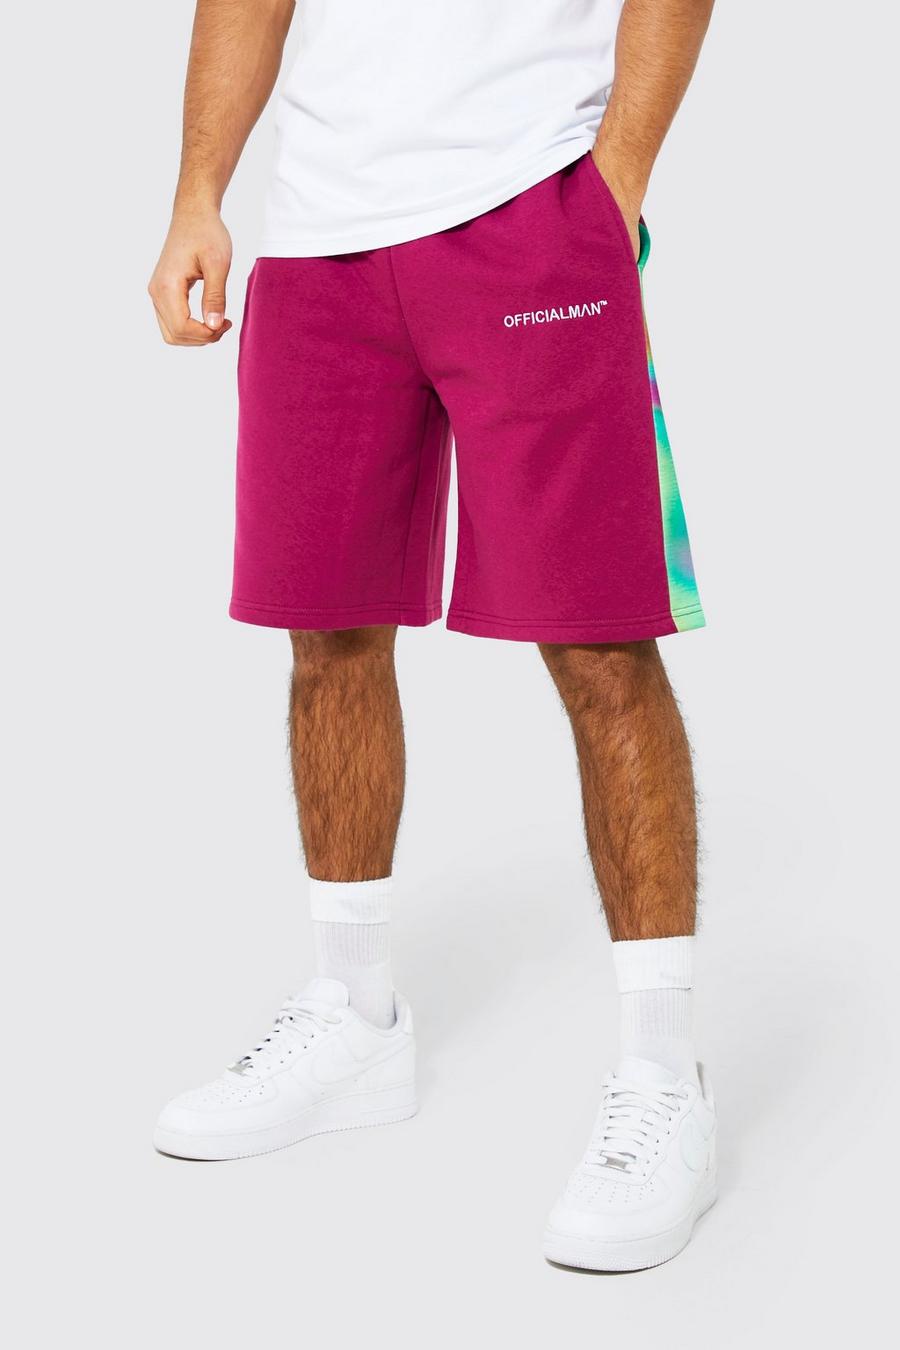 Purple Oversized Official Man Print Panel Shorts image number 1